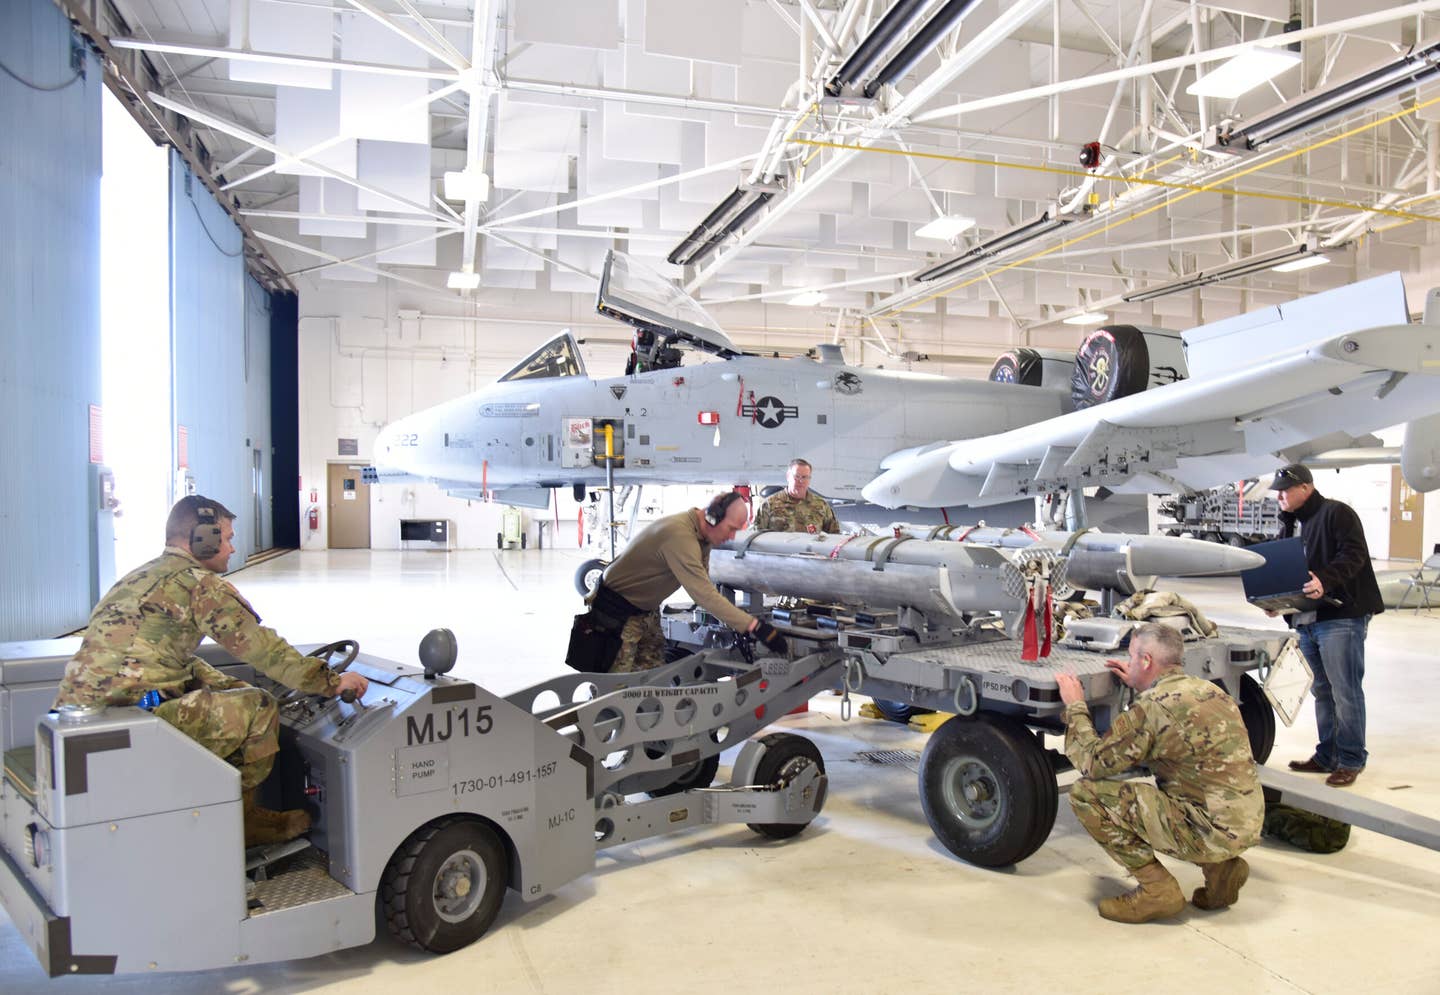 Maintainers prepare to load Miniature Air-Launched Decoys, or MALDs, onto an A-10C at Volk Field Air National Guard Base, Wisconsin, in March 2022. <em>U.S. Air National Guard photo by Tech. Sgt. Samara Taylor</em>